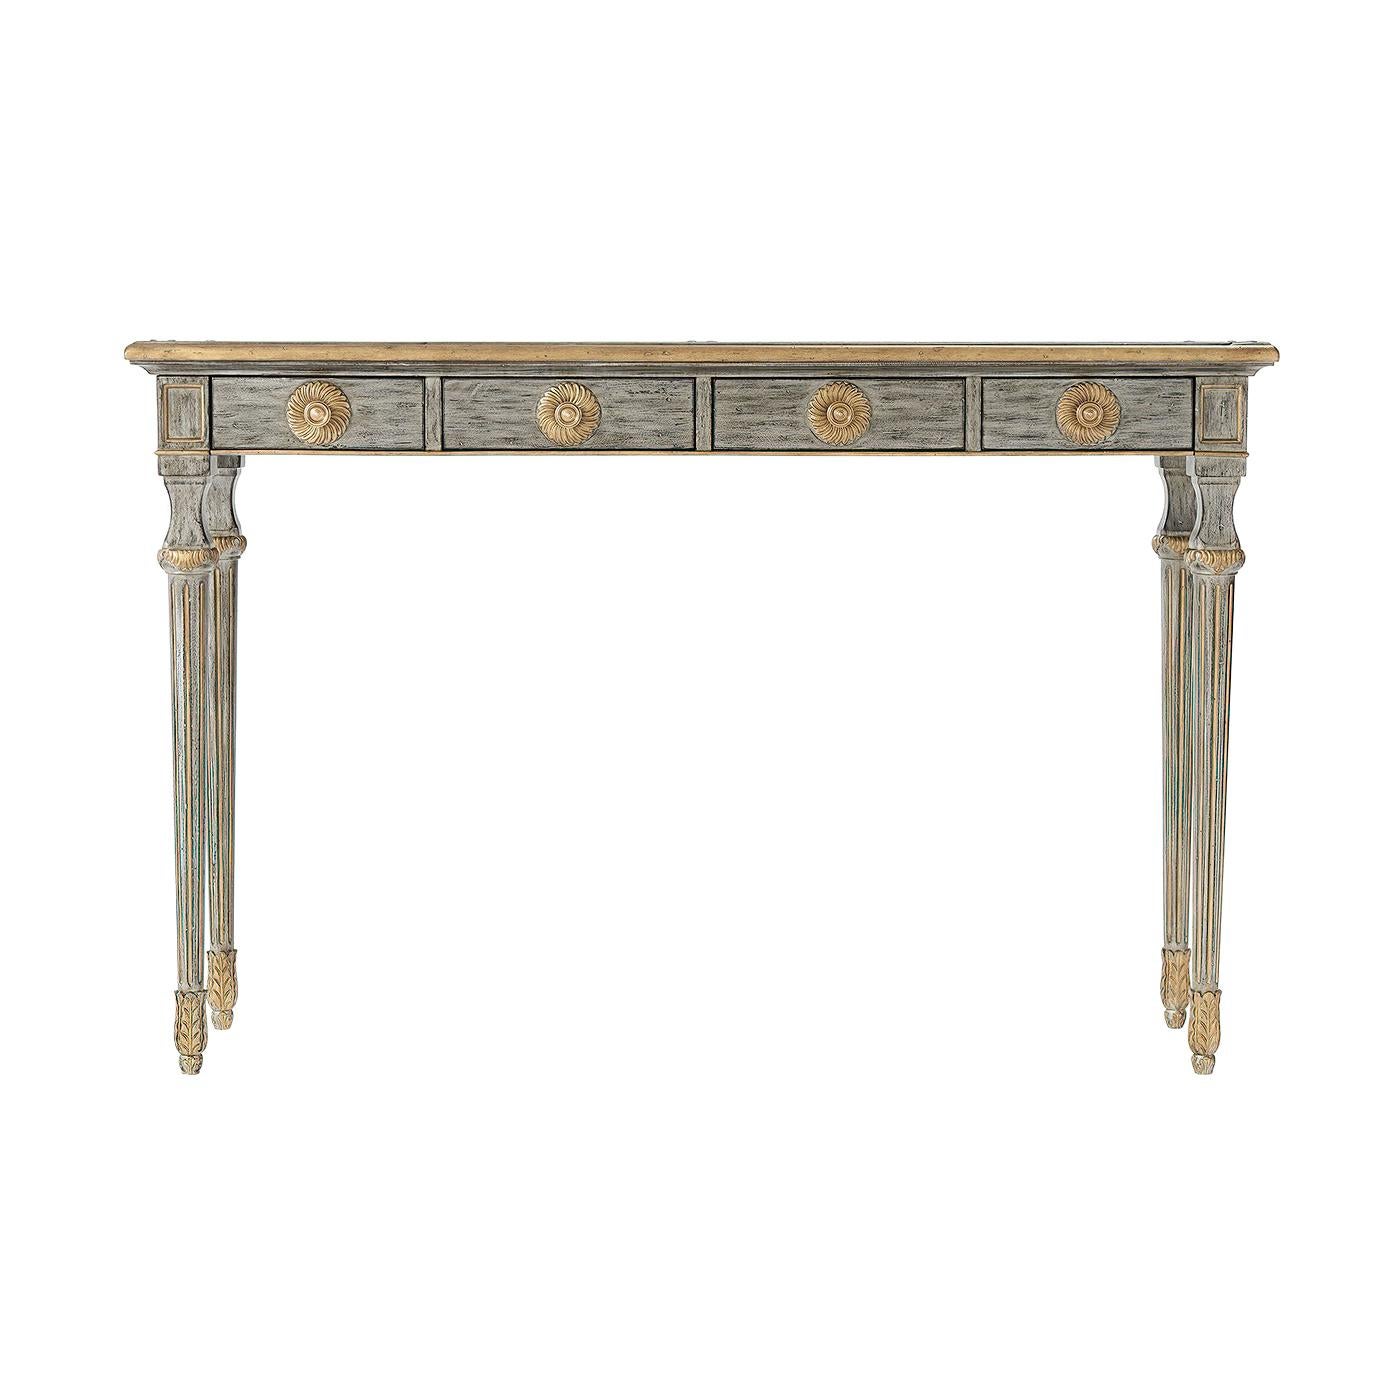 A country house grey painted grained mahogany and gilt highlighted console table, the rectangular top above four frieze drawers with gilt rosettes and brass handles, on turned tapering fluted legs with carved capitals and leaf cast brass feet.